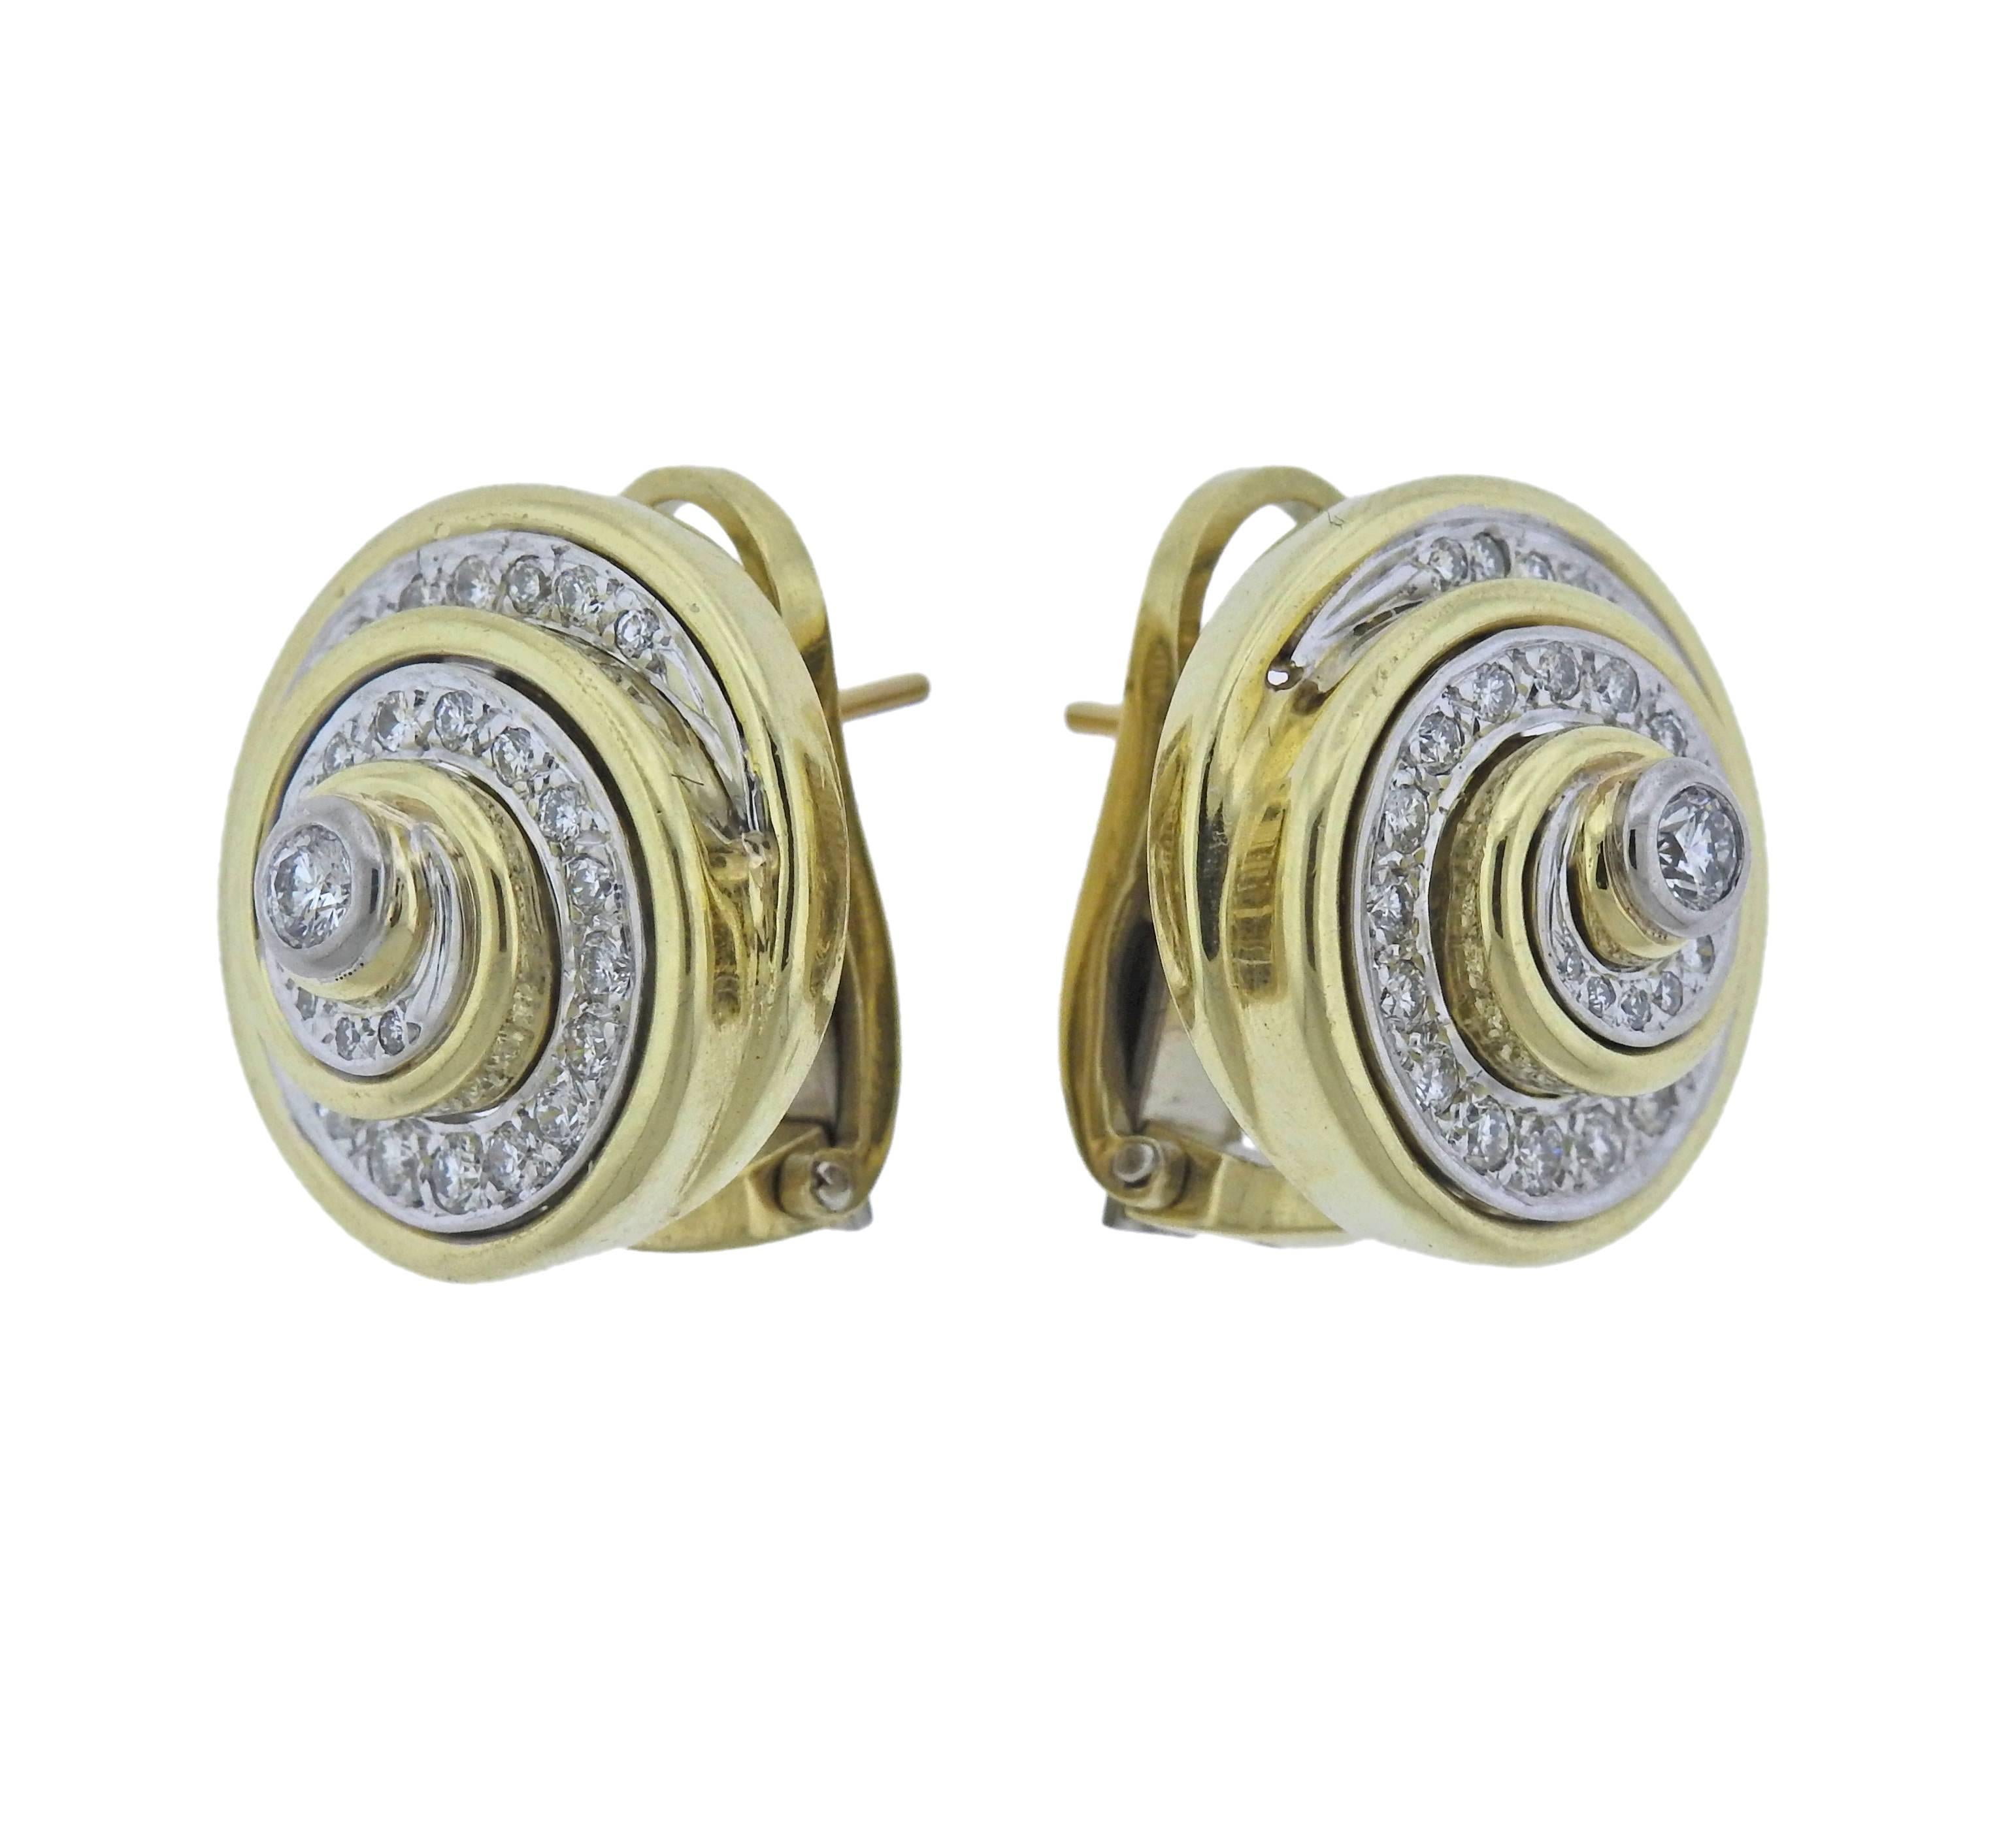 A pair of 18k gold swirl earrings featuring approximately 1.40 ctw of VS/SI- G/H diamonds. Earrings measure 19.5mm in diameter. Marked 18k. Weight is 25.5 grams. 